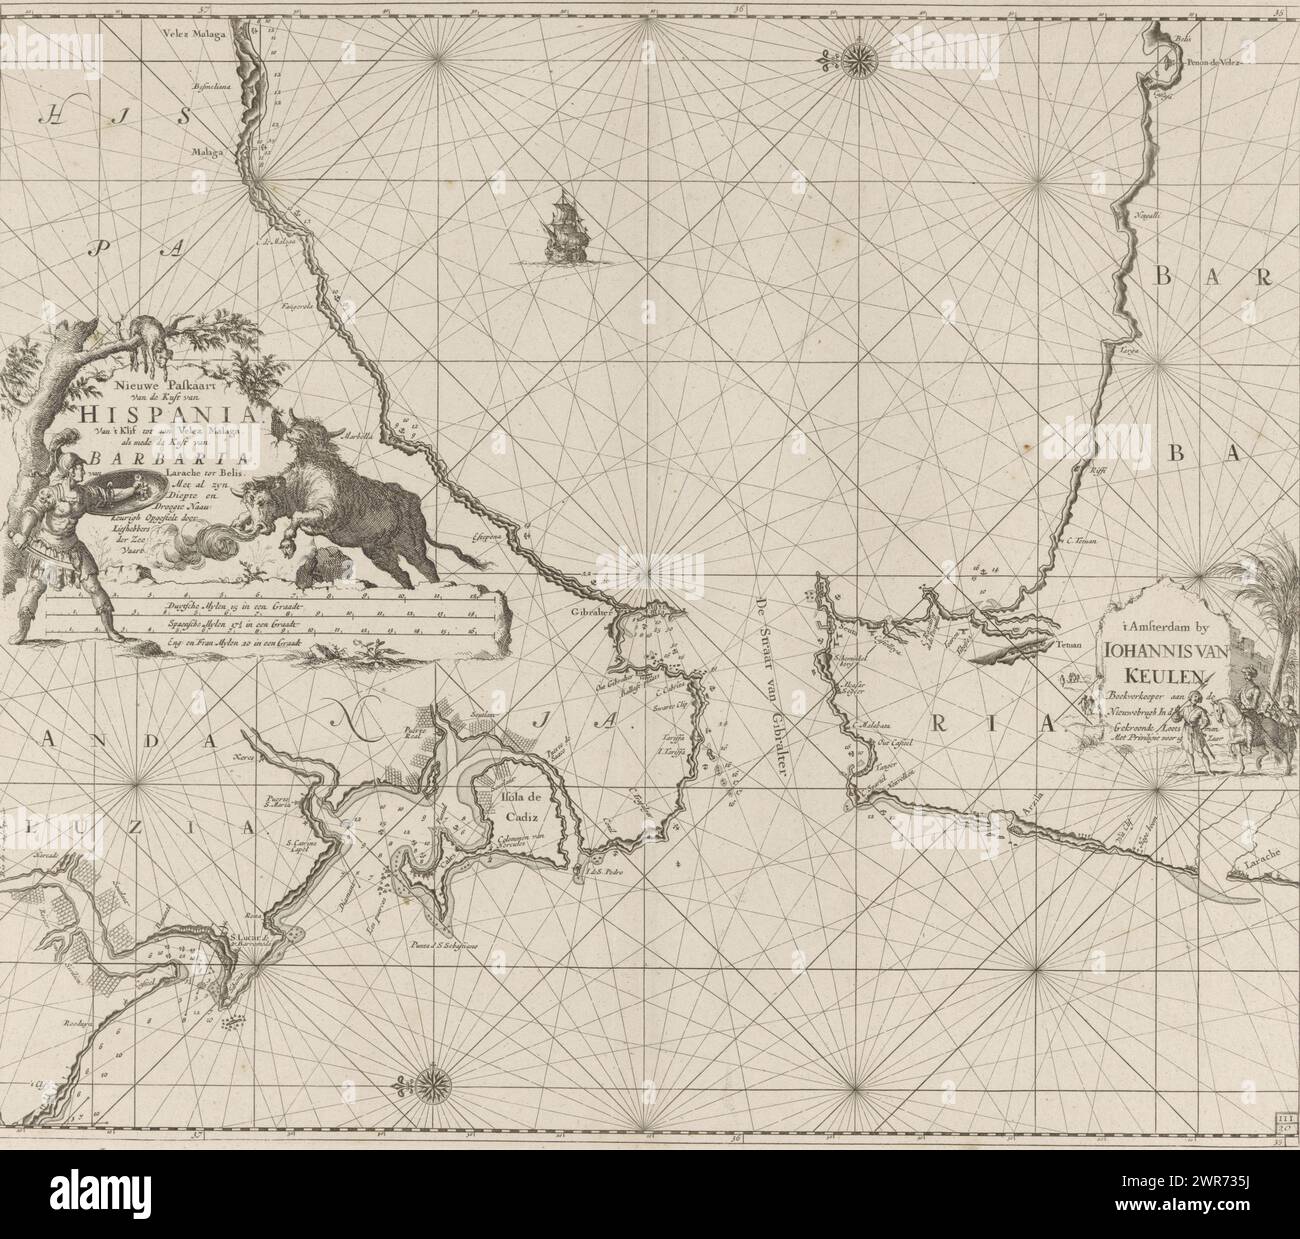 Nautical chart of the Strait of Gibraltar, New Pass Chart of the Coast of Hispania. From 't Klif to Velez Malaga, as well as the Coast of Barbaria. from Larache to Belis. With all its Depth and Drought Naau-keurigh Prepared by Lovers of Sea Navigation (title on object), Pass map of the Strait of Gibraltar, with two compass roses, the North is on the left. On the left a cartouche with the title and the scale in German, Spanish and English or French miles. A bullfight takes place around the title. To the right of the publisher's address is a palm tree and some men with turbans. Stock Photo